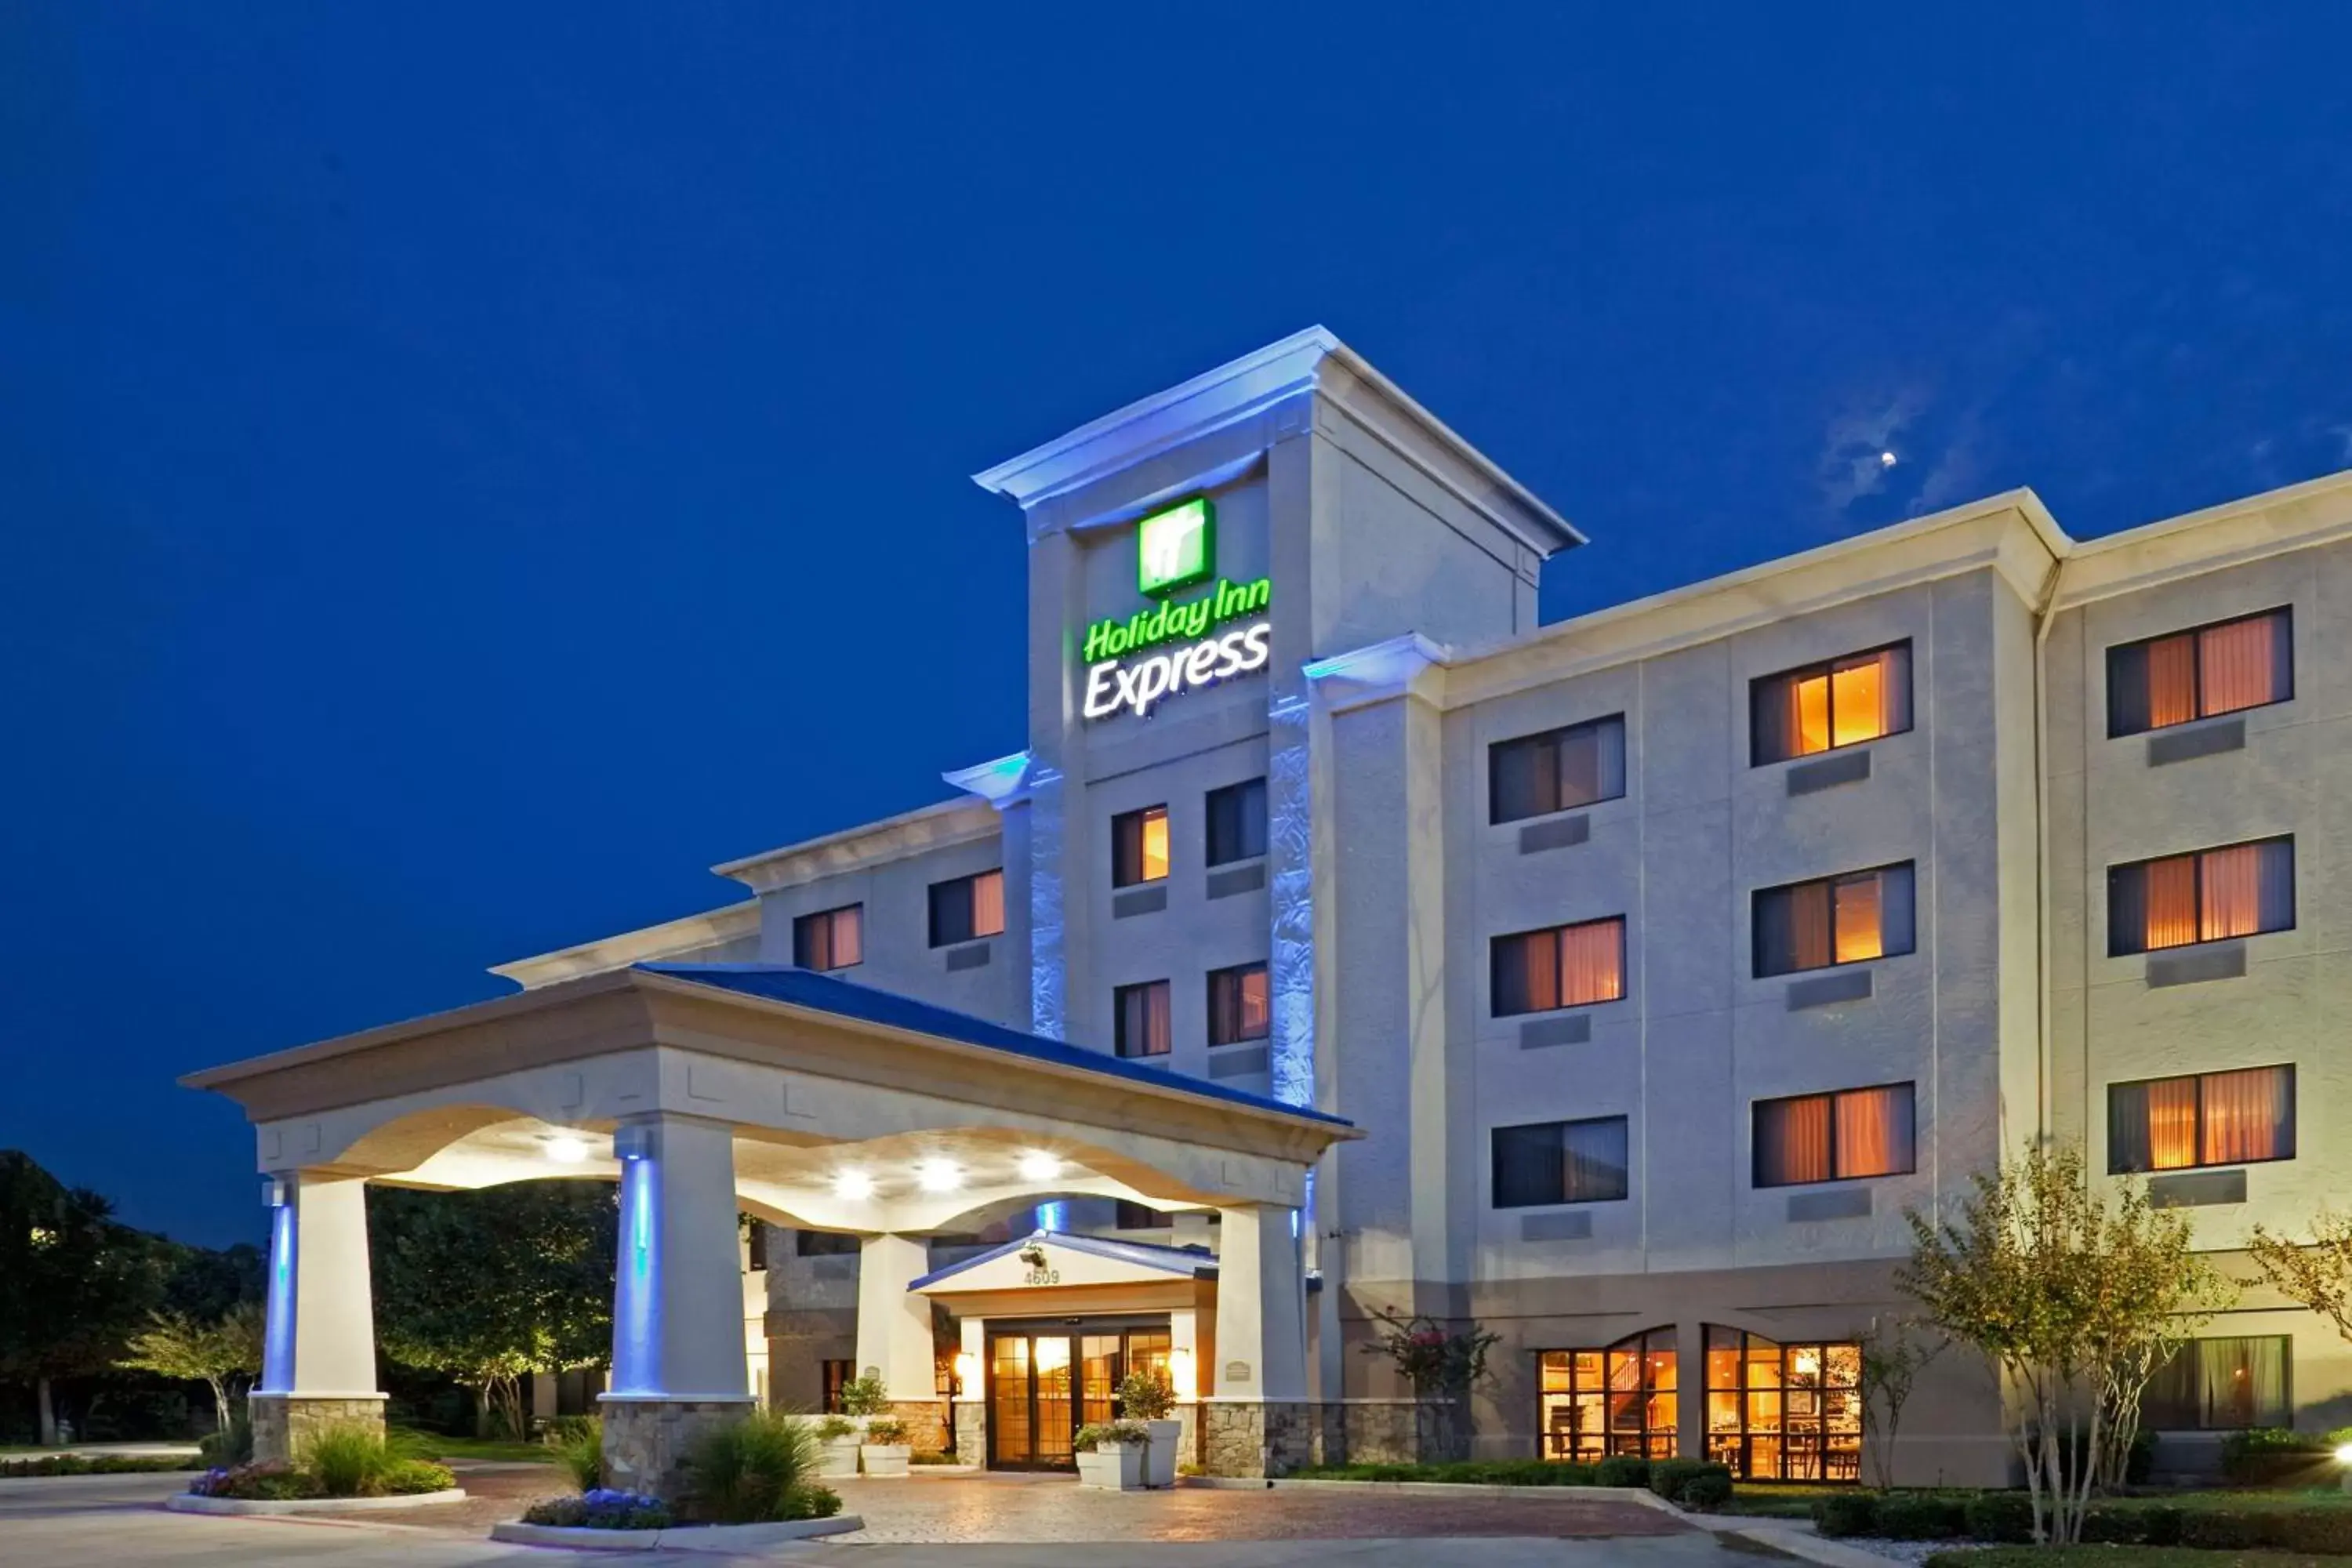 Property building in Holiday Inn Express Hotel and Suites Fort Worth/I-20